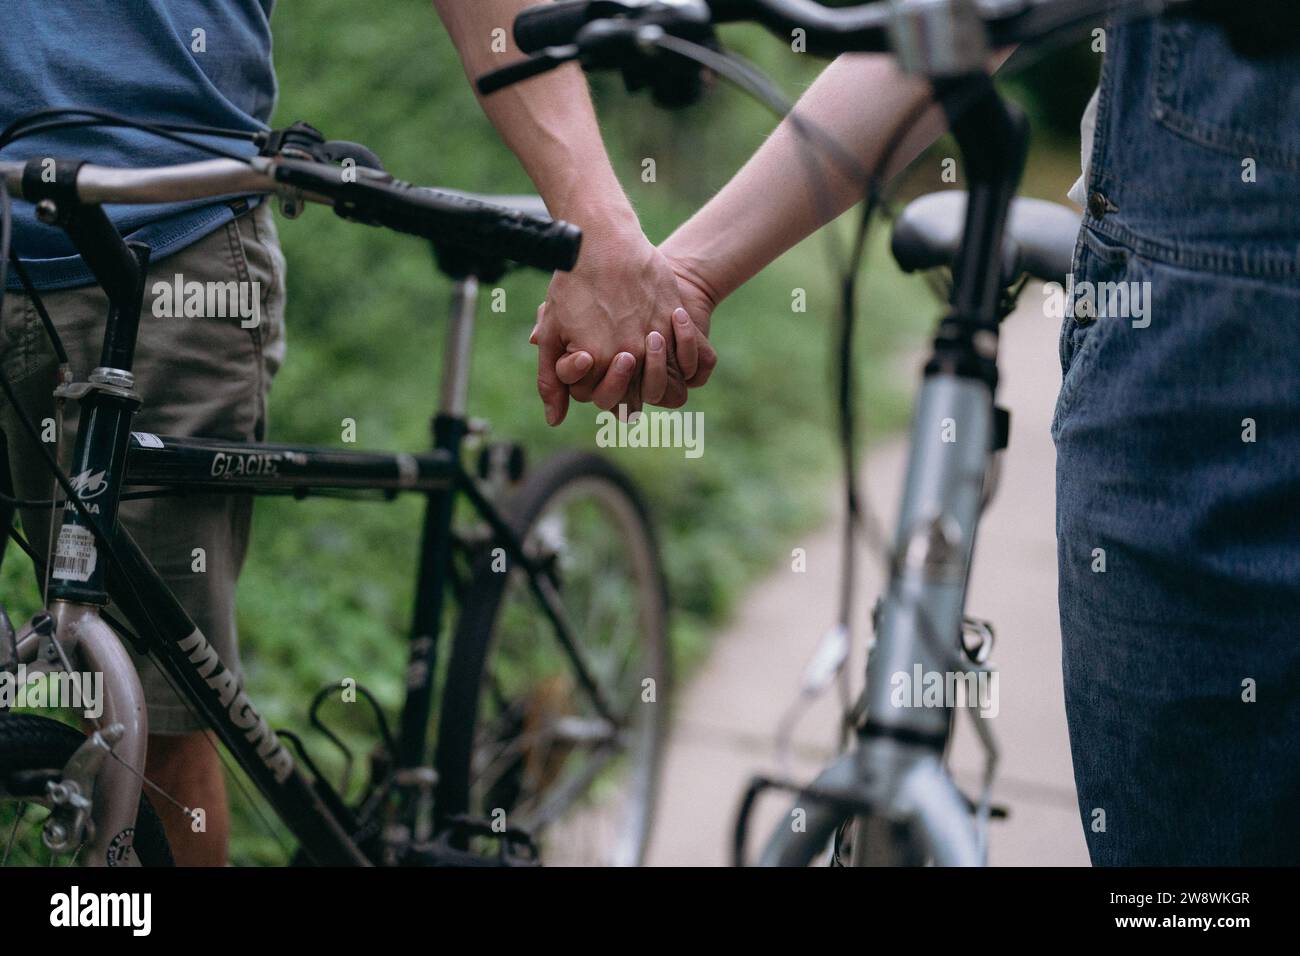 Couple on a date holding hands while walking their bicycles Stock Photo